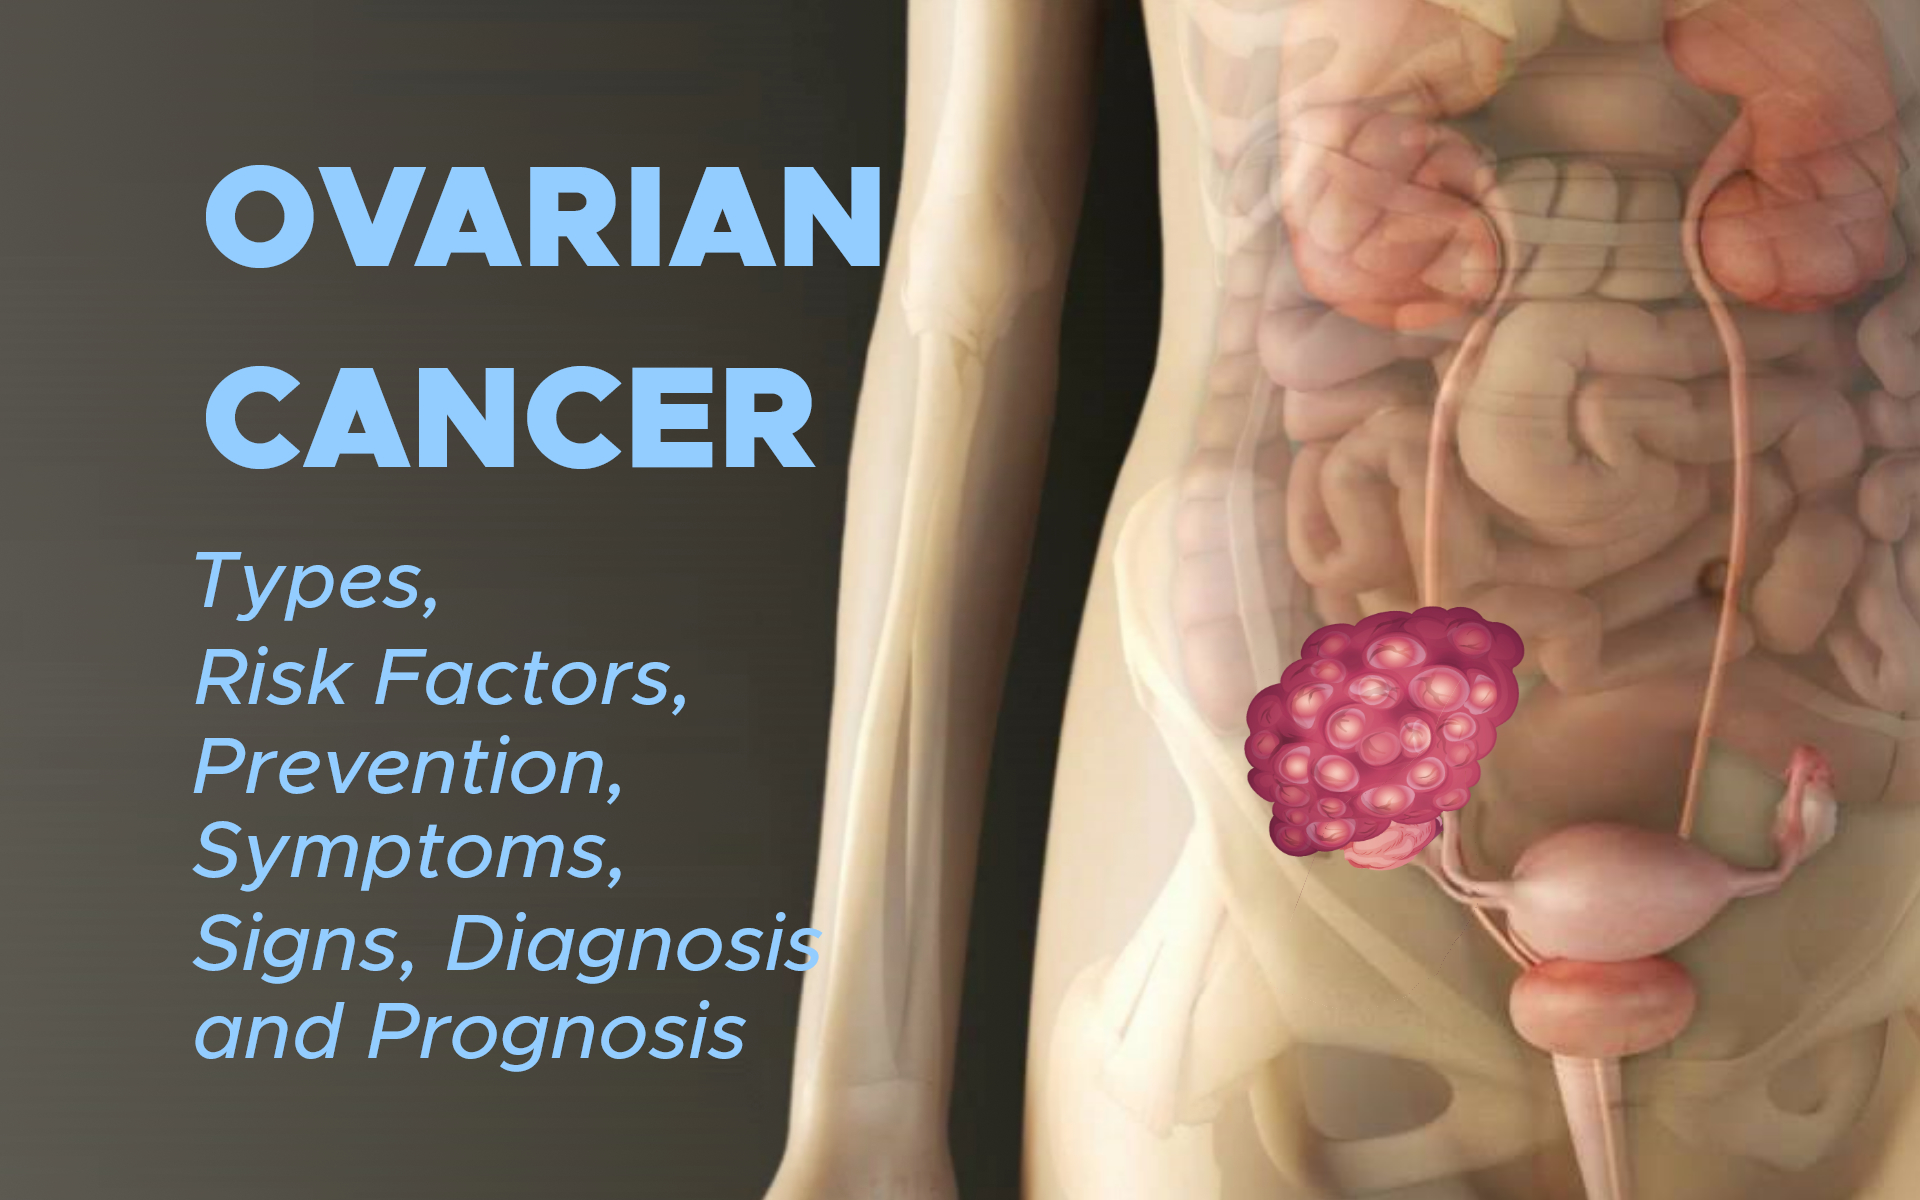 Ovarian Cancer: Types, Risk Factors, Prevention, Symptoms, Signs, Diagnosis and Prognosis